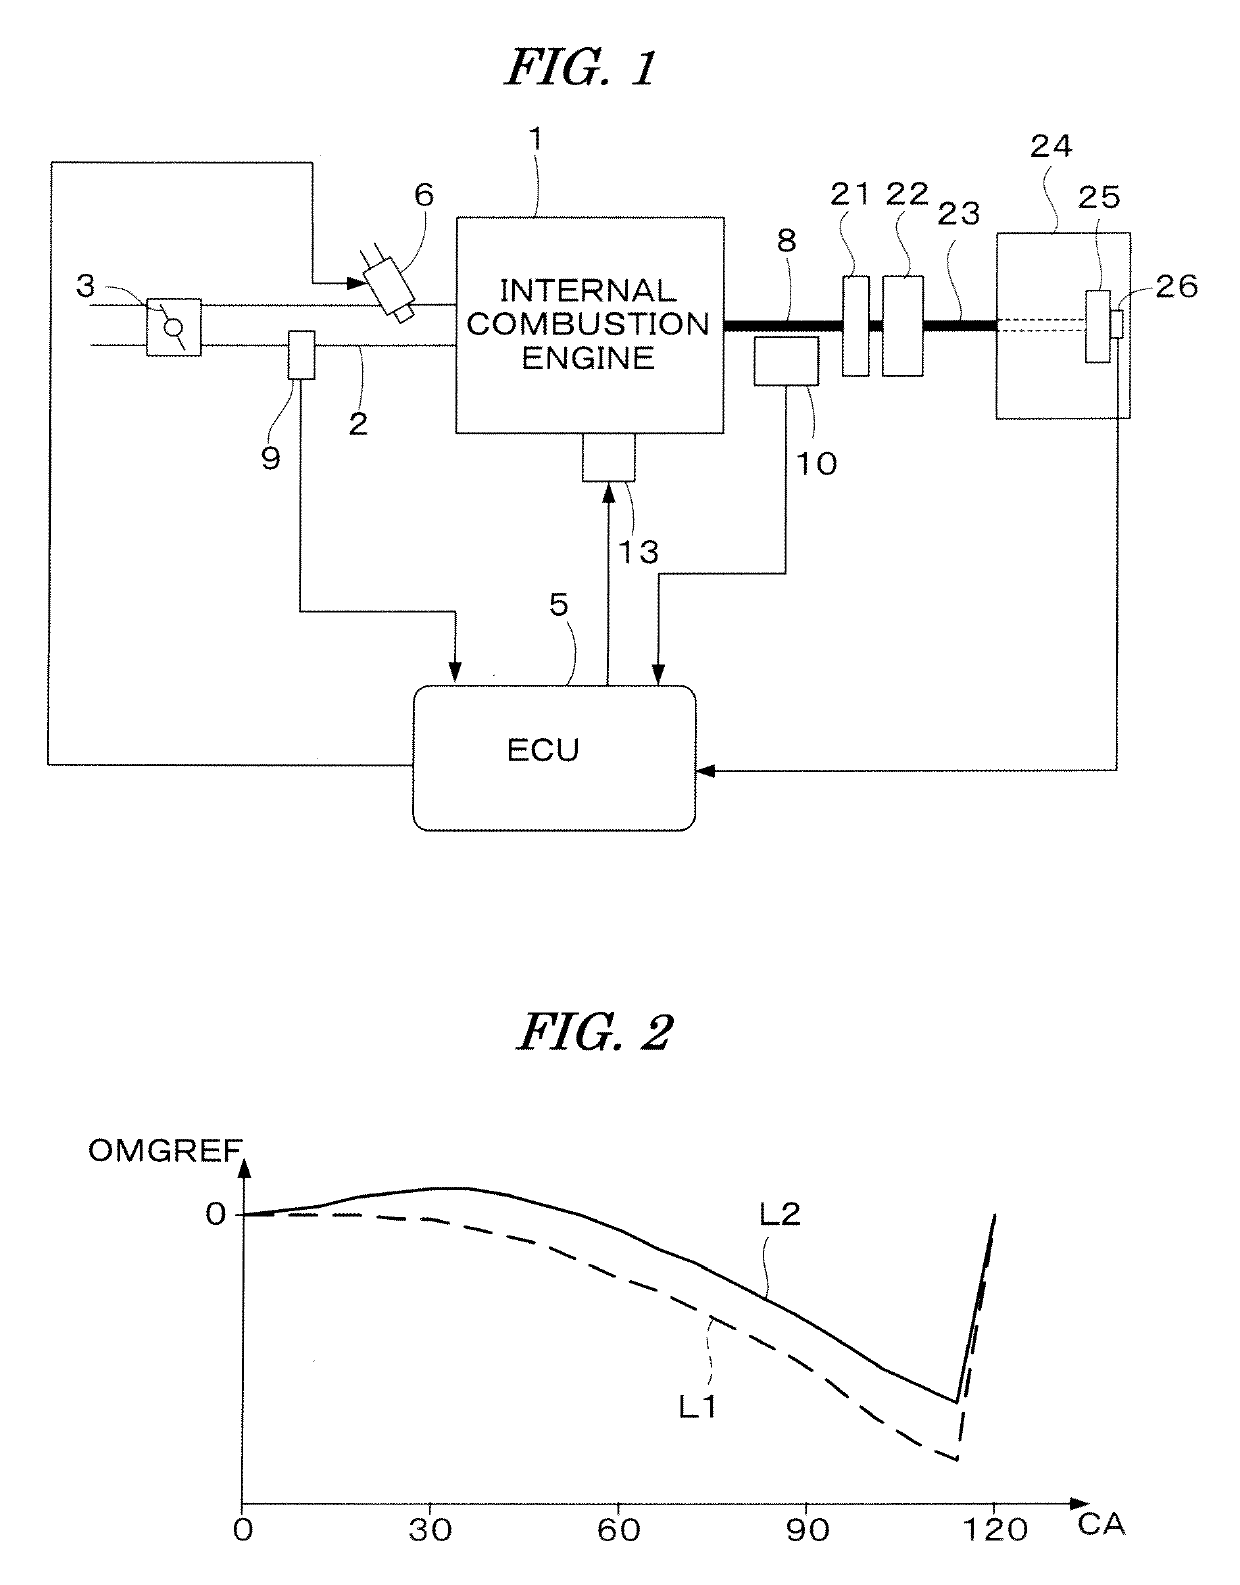 Misfire detecting apparatus for internal combustion engine